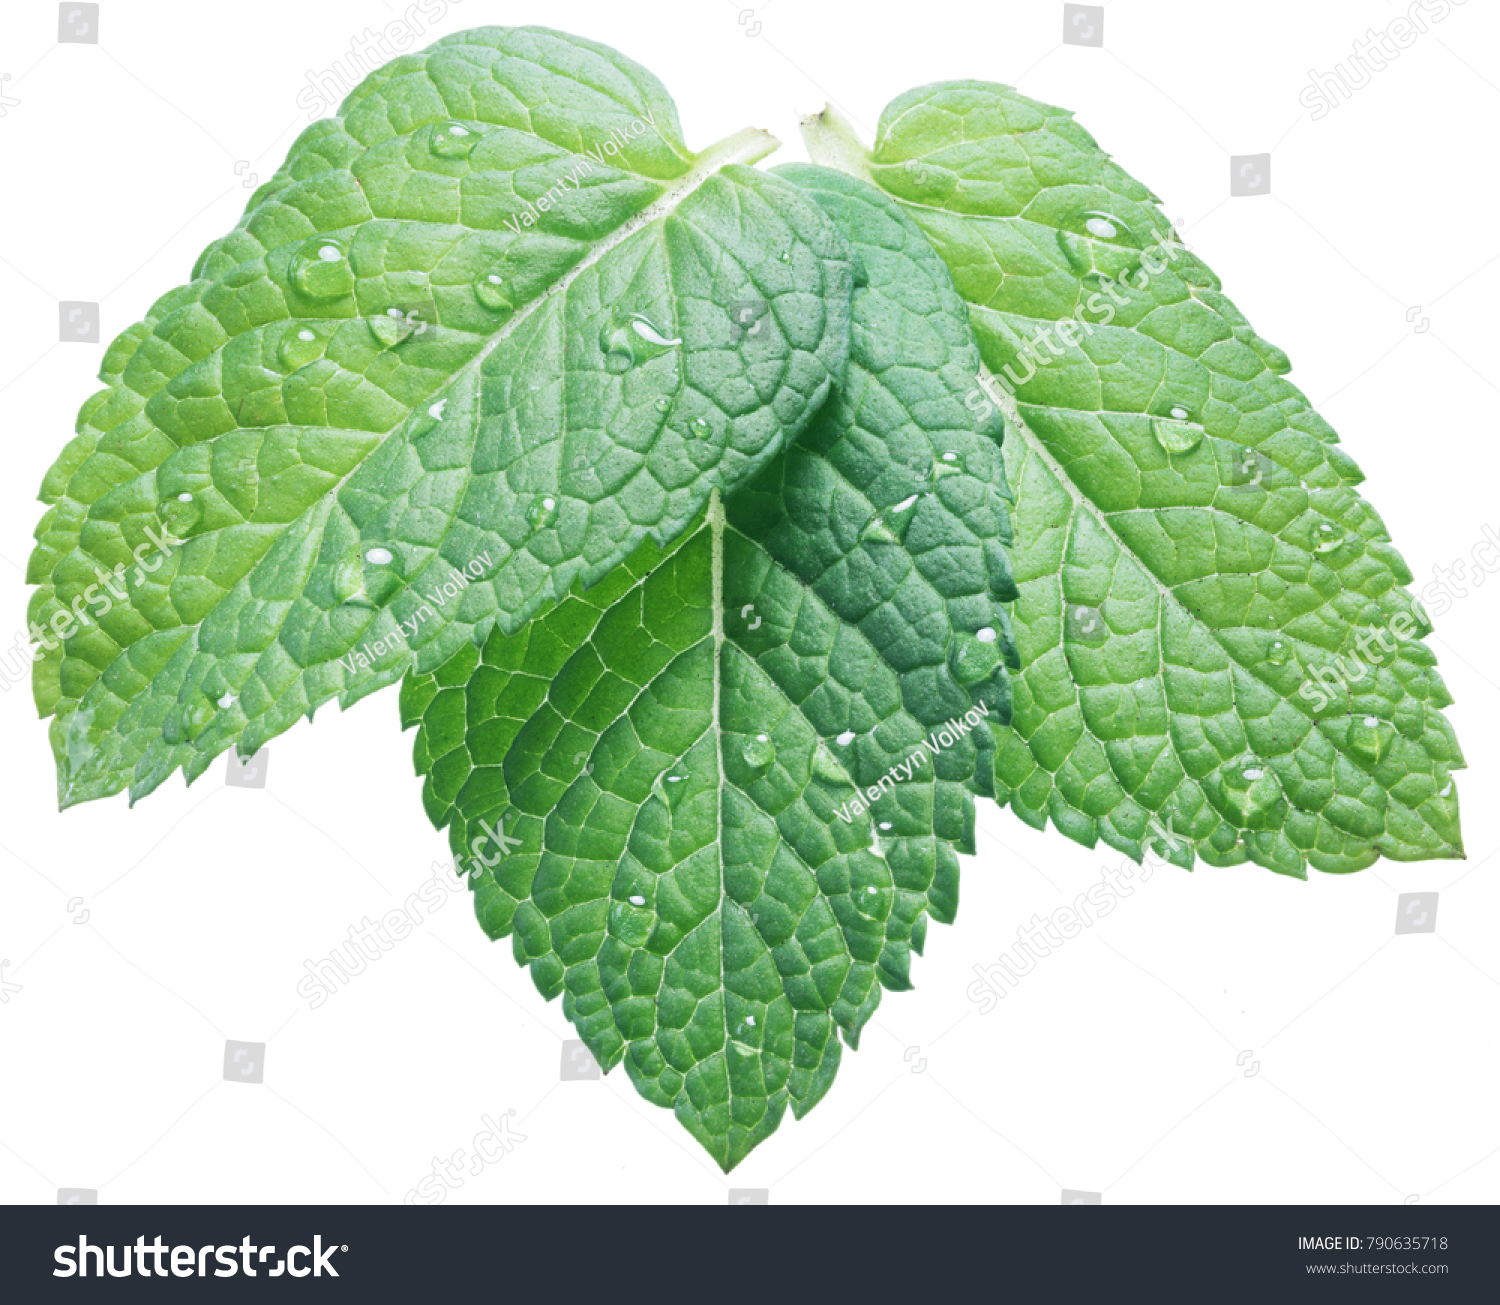 Three spearmint or mint leaves with water drops on white background. Top view. #790635718